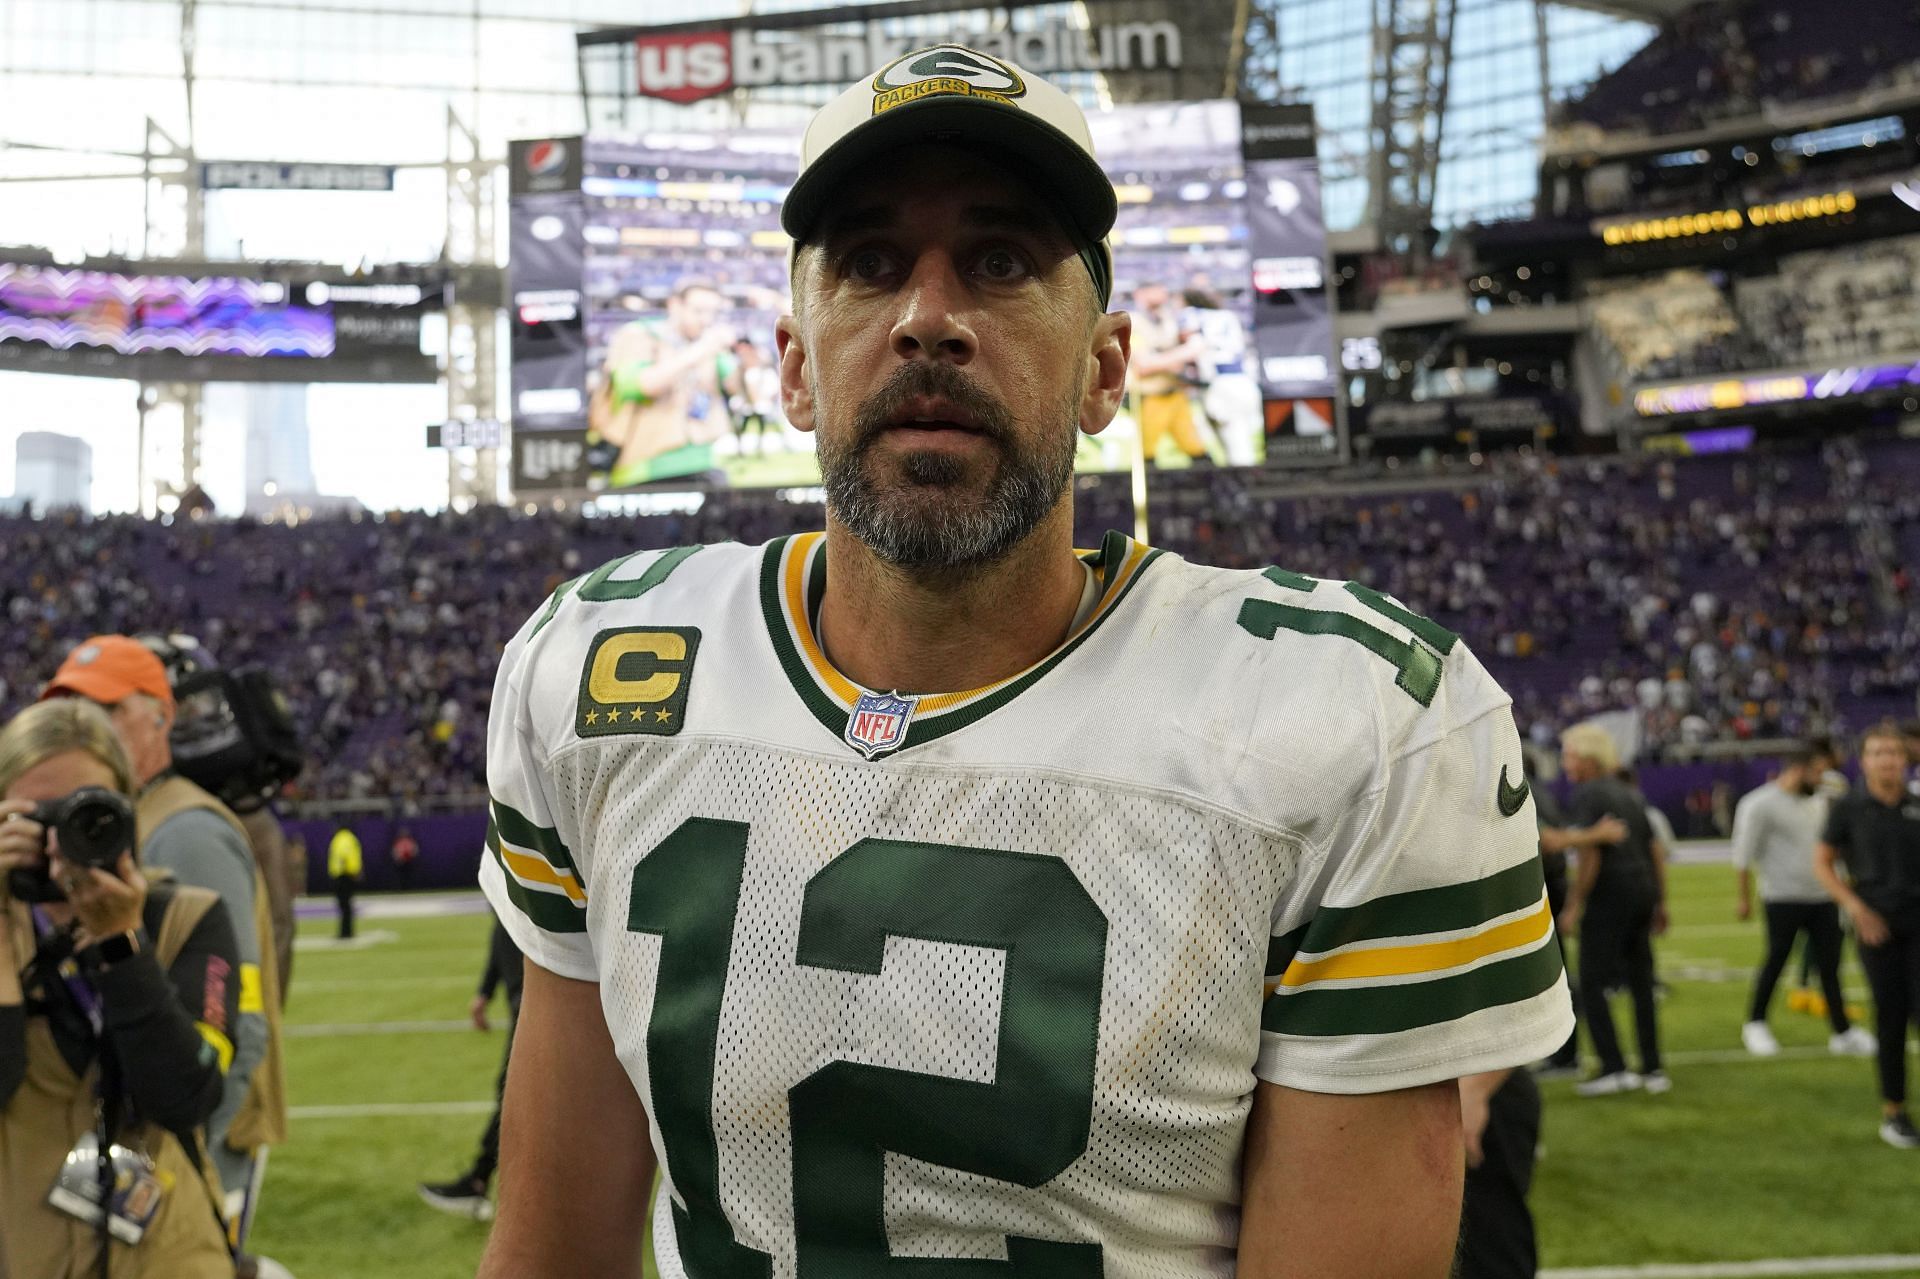 Aaron Rodgers, vaccines and Jets speculation cap wild week for Packers